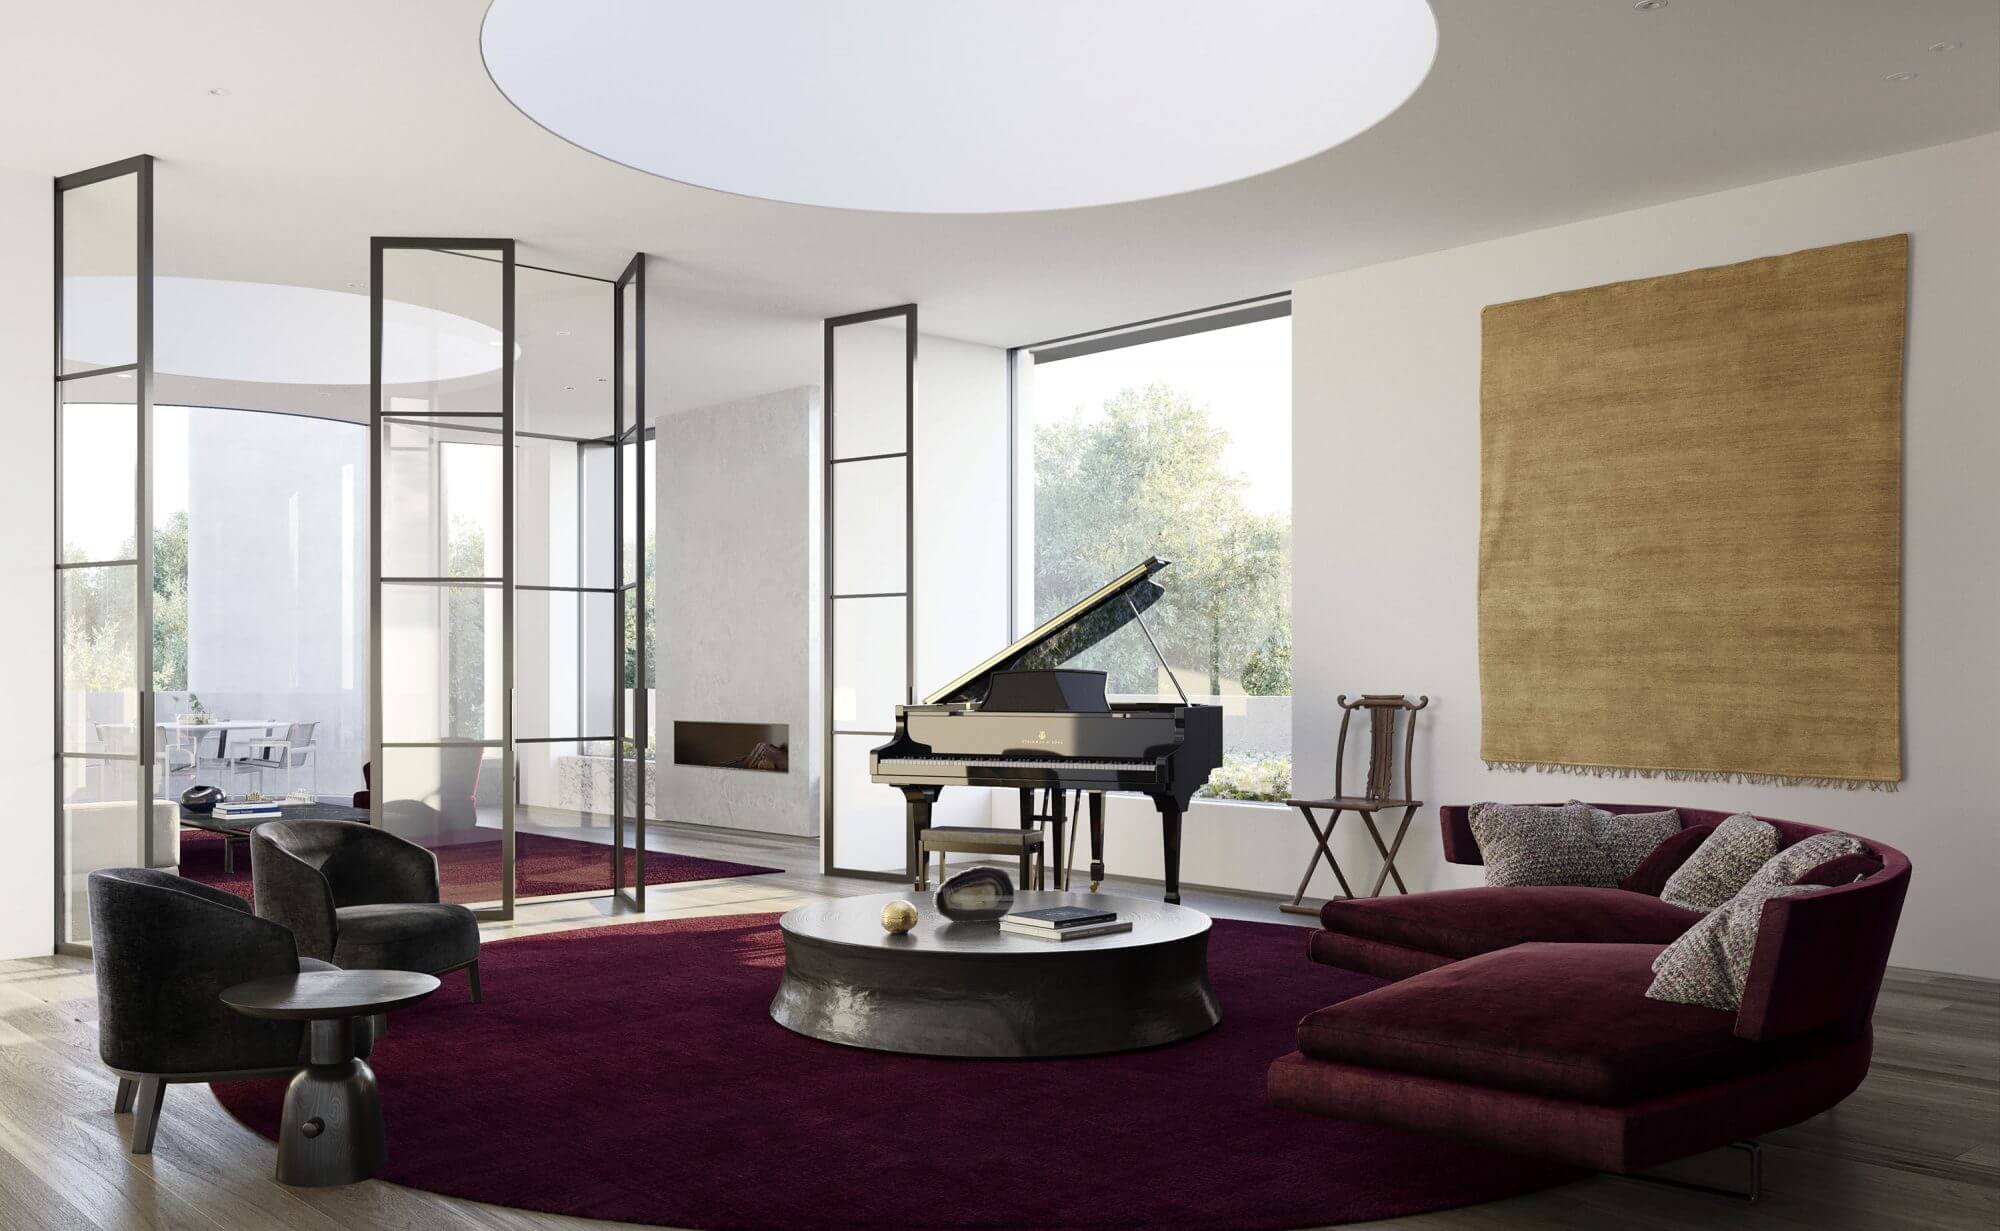 A living room filled with furniture and a piano
